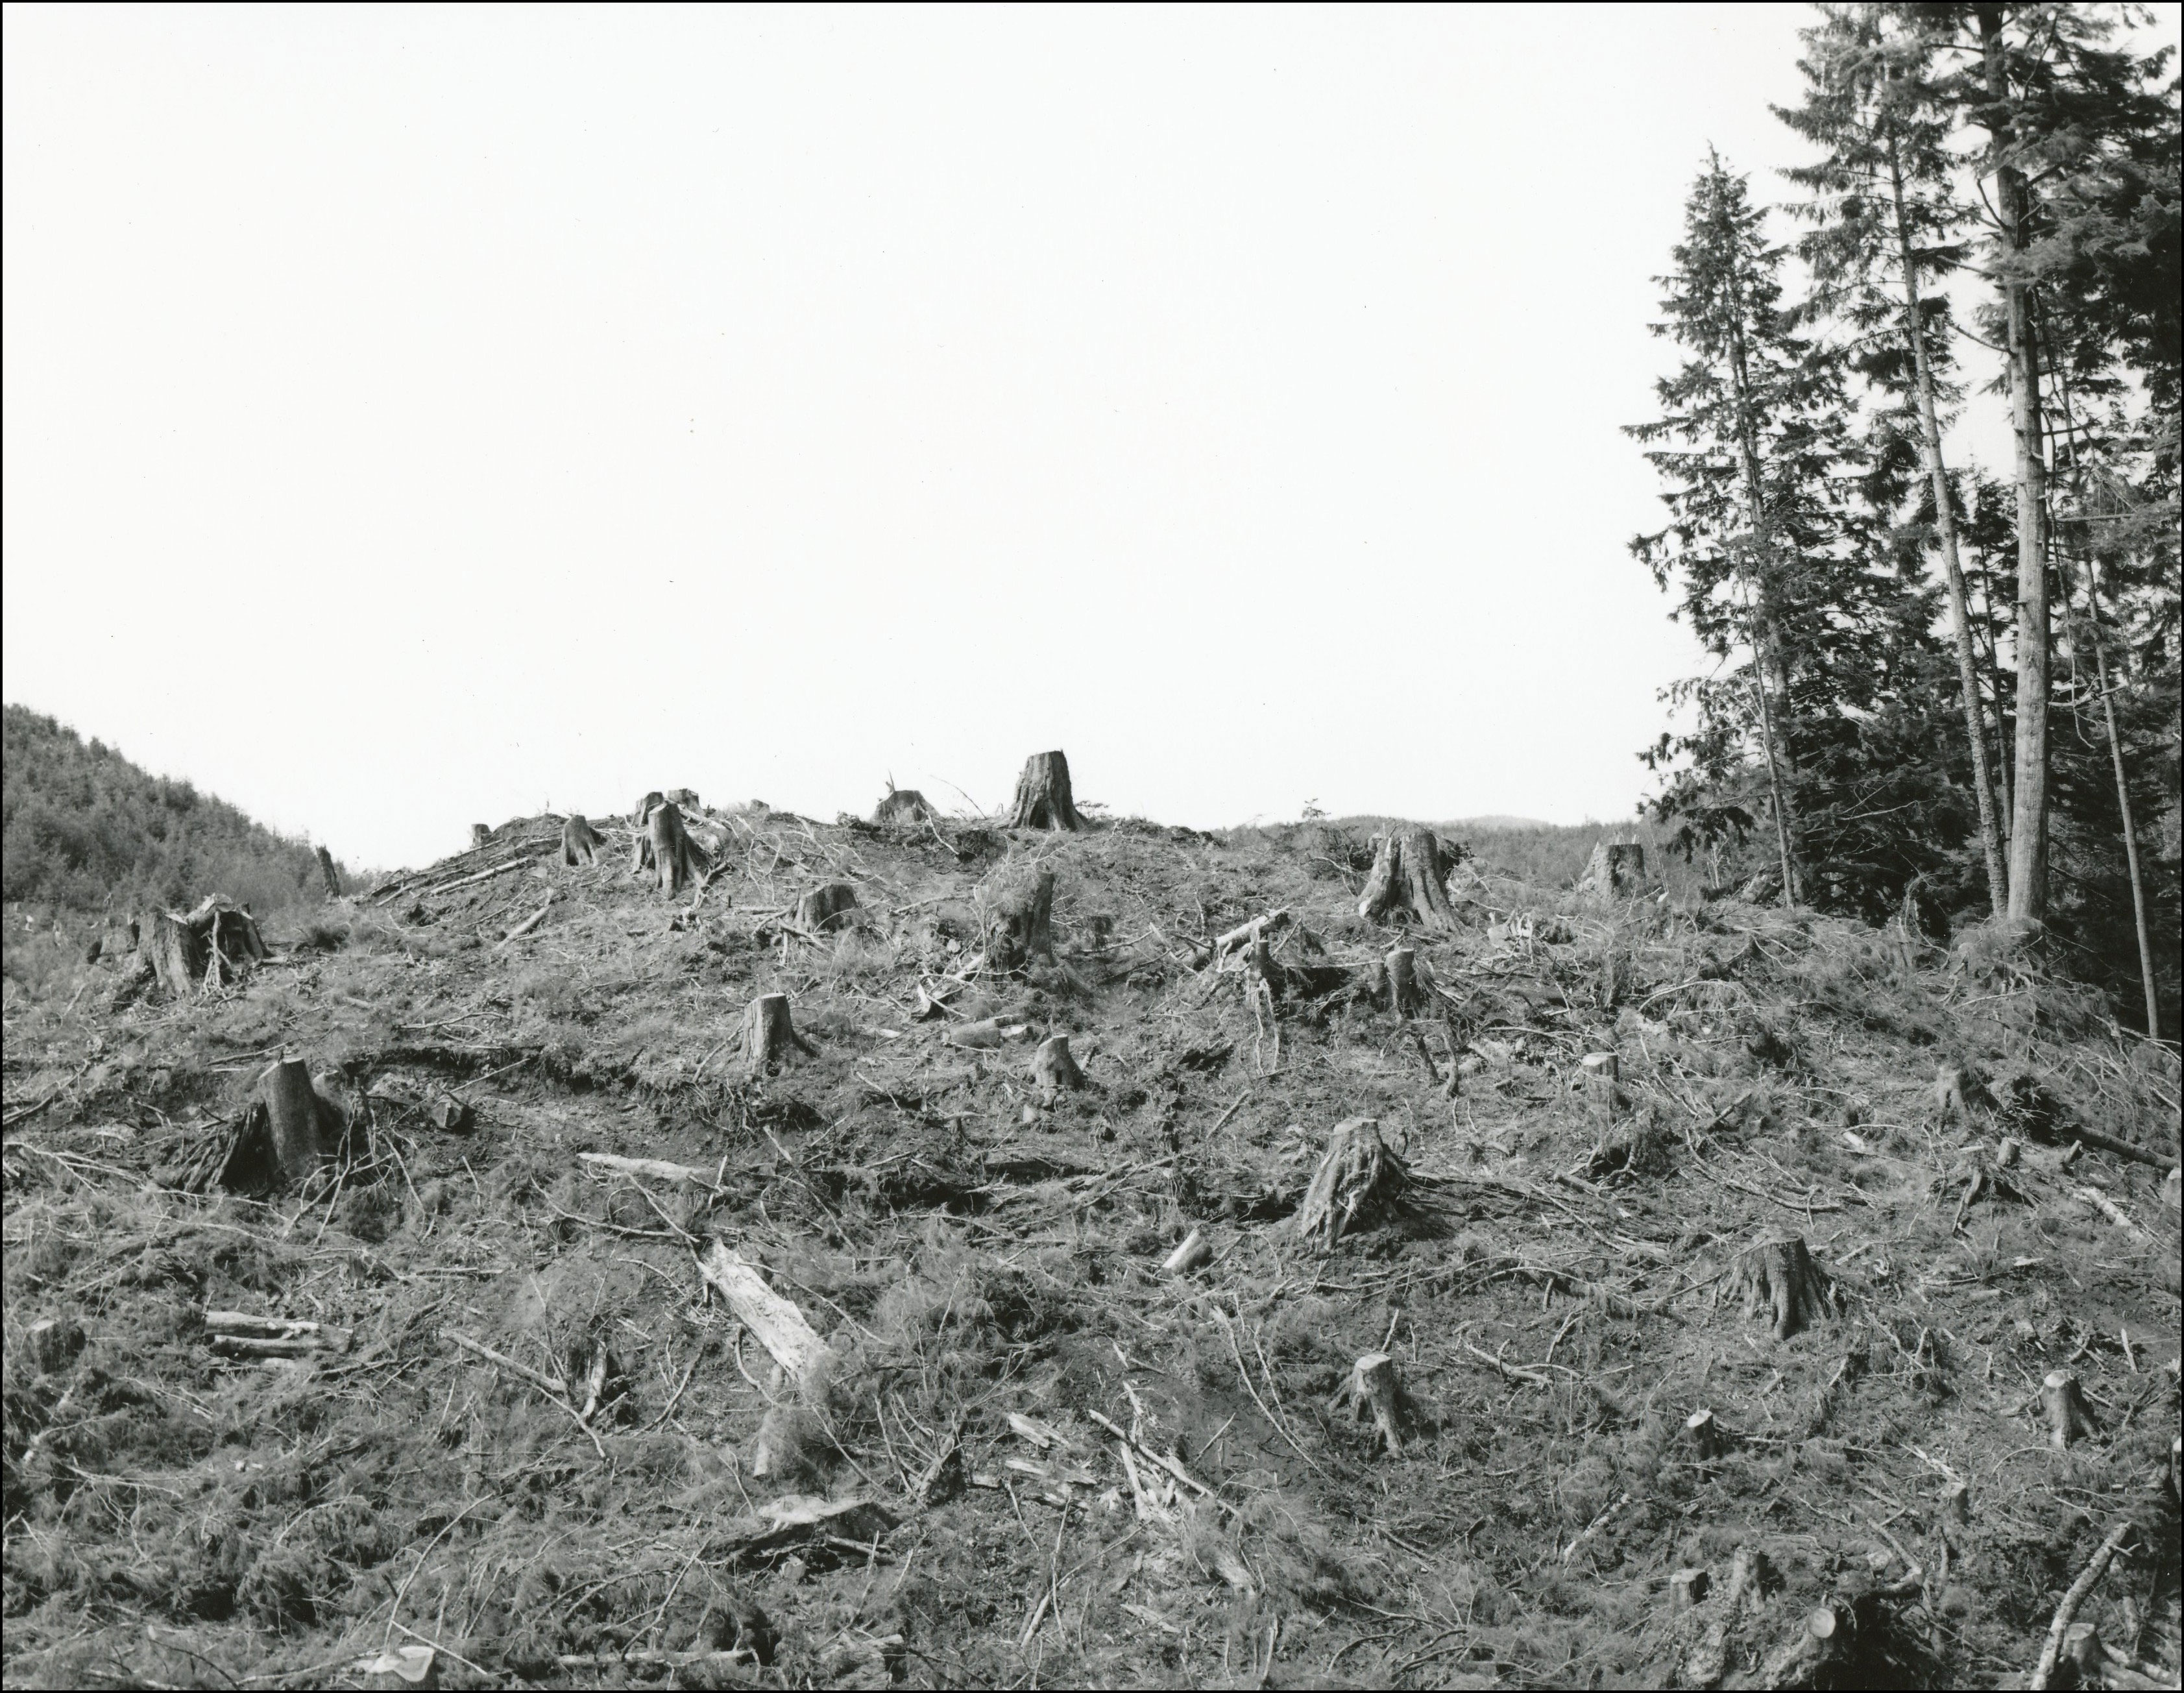 Forest clear cut stumps on hill nob with standing pine trees to the right